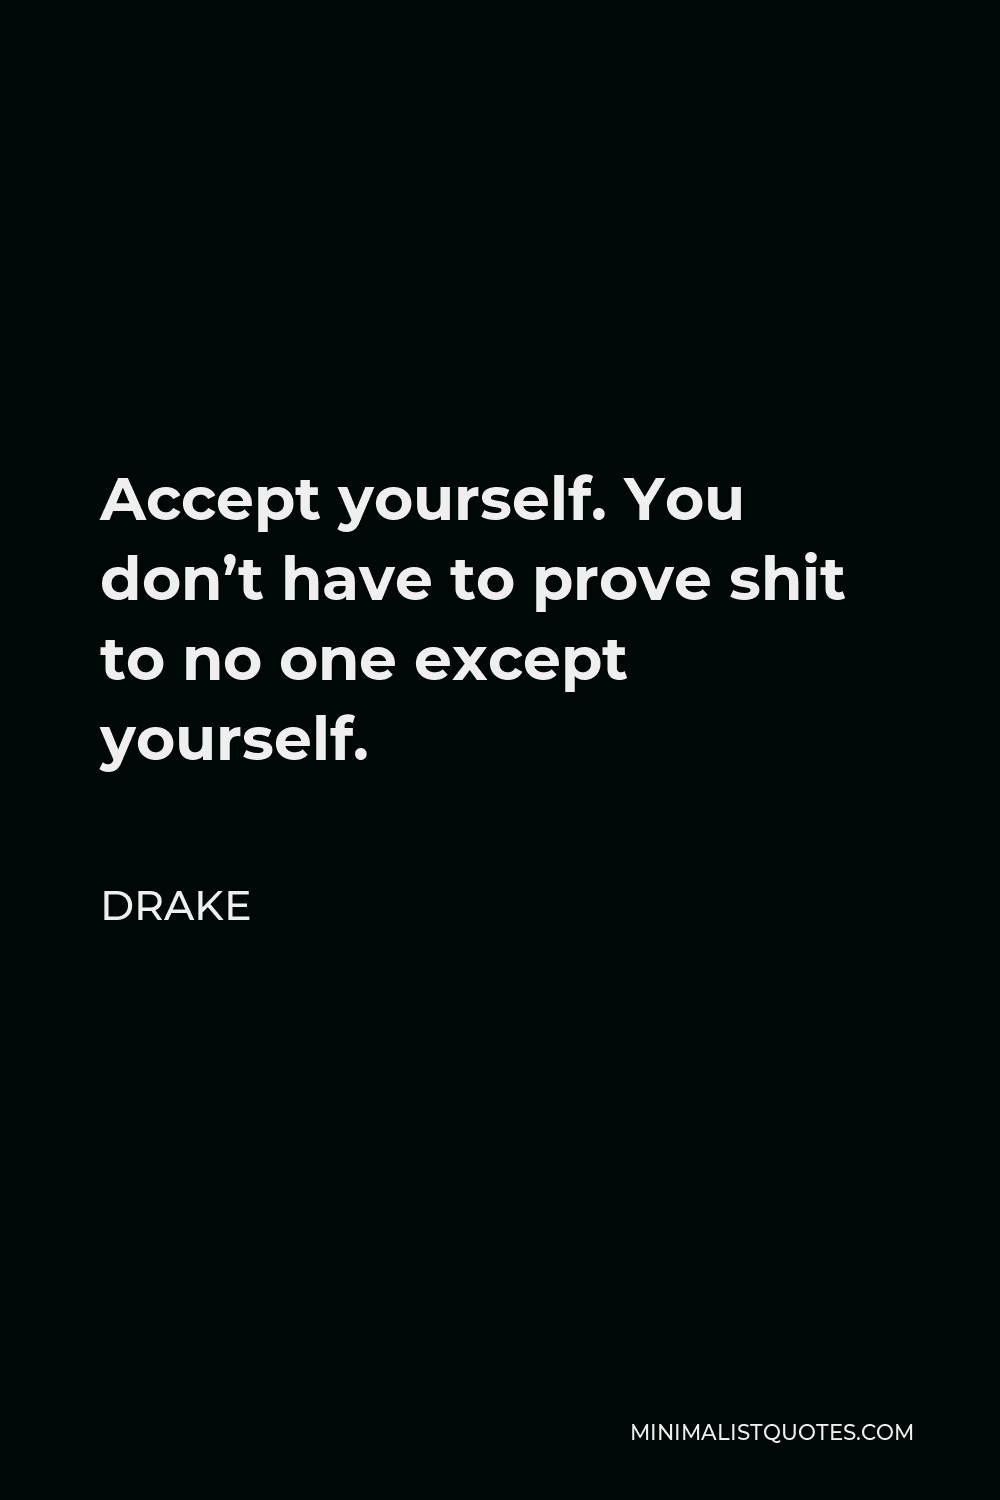 Drake Quote - Accept yourself. You don’t have to prove shit to no one except yourself.